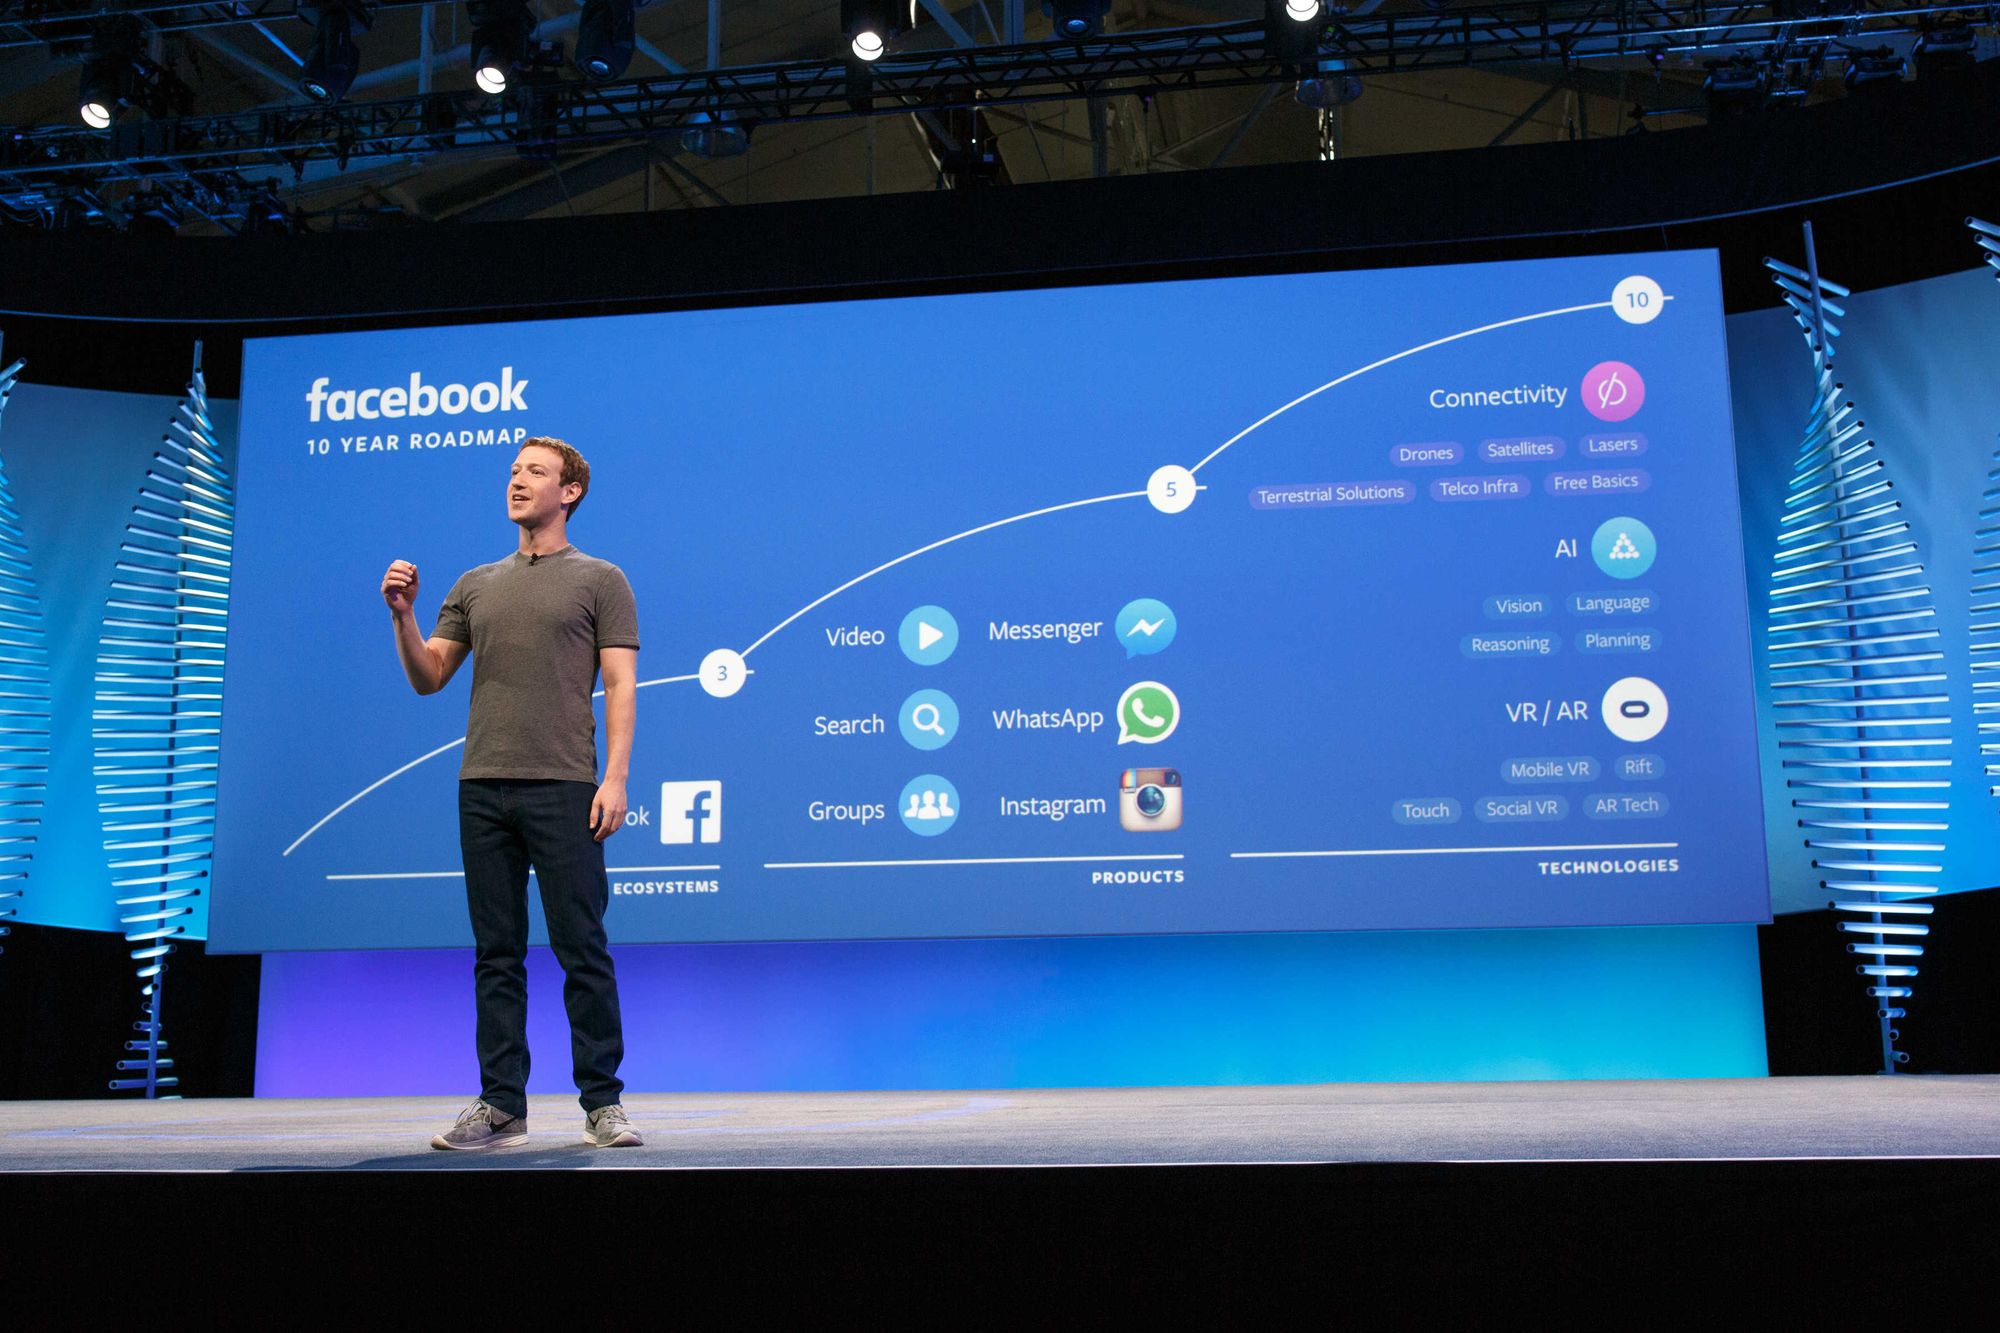 Everything Marketers Need to Know About F8 Conference 2017 to Stay Ahead on Facebook